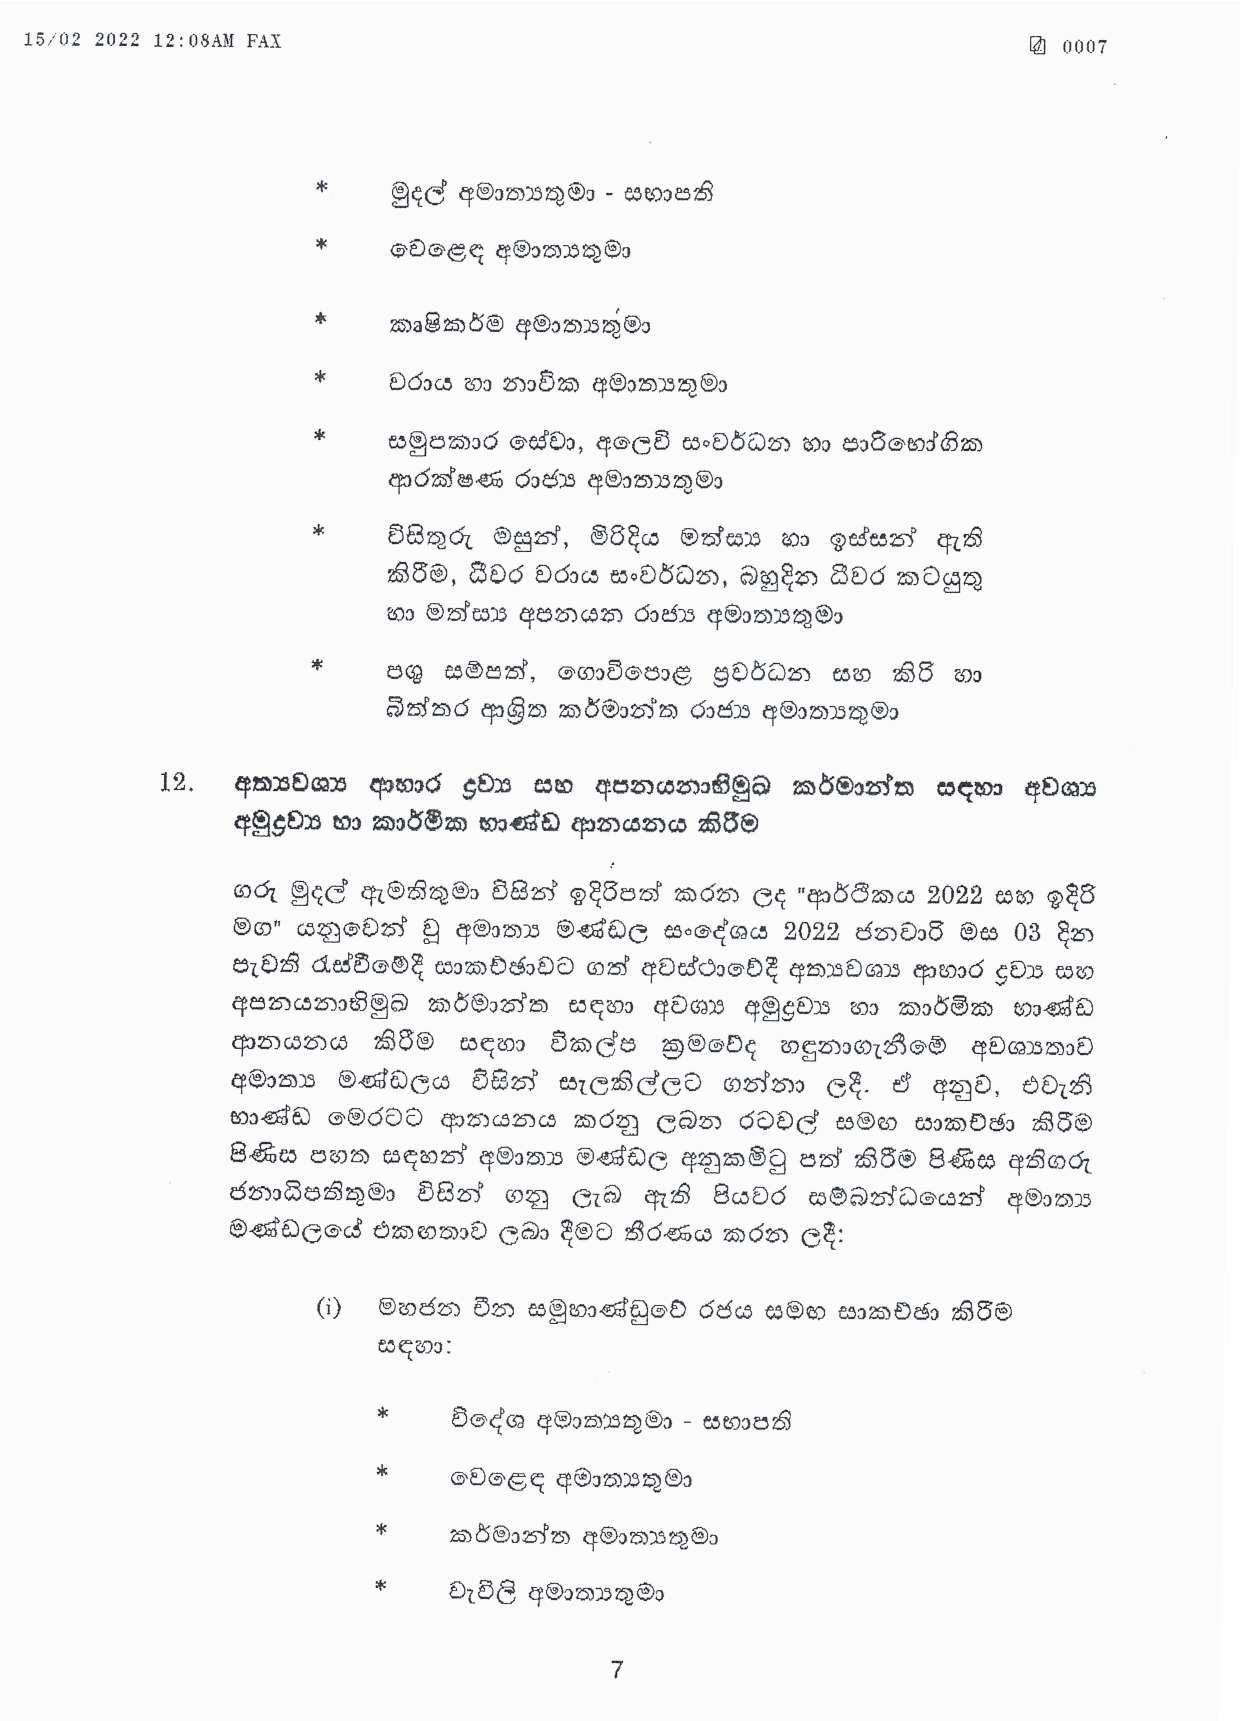 Cabinet Decision on 14.02.2022 page 007